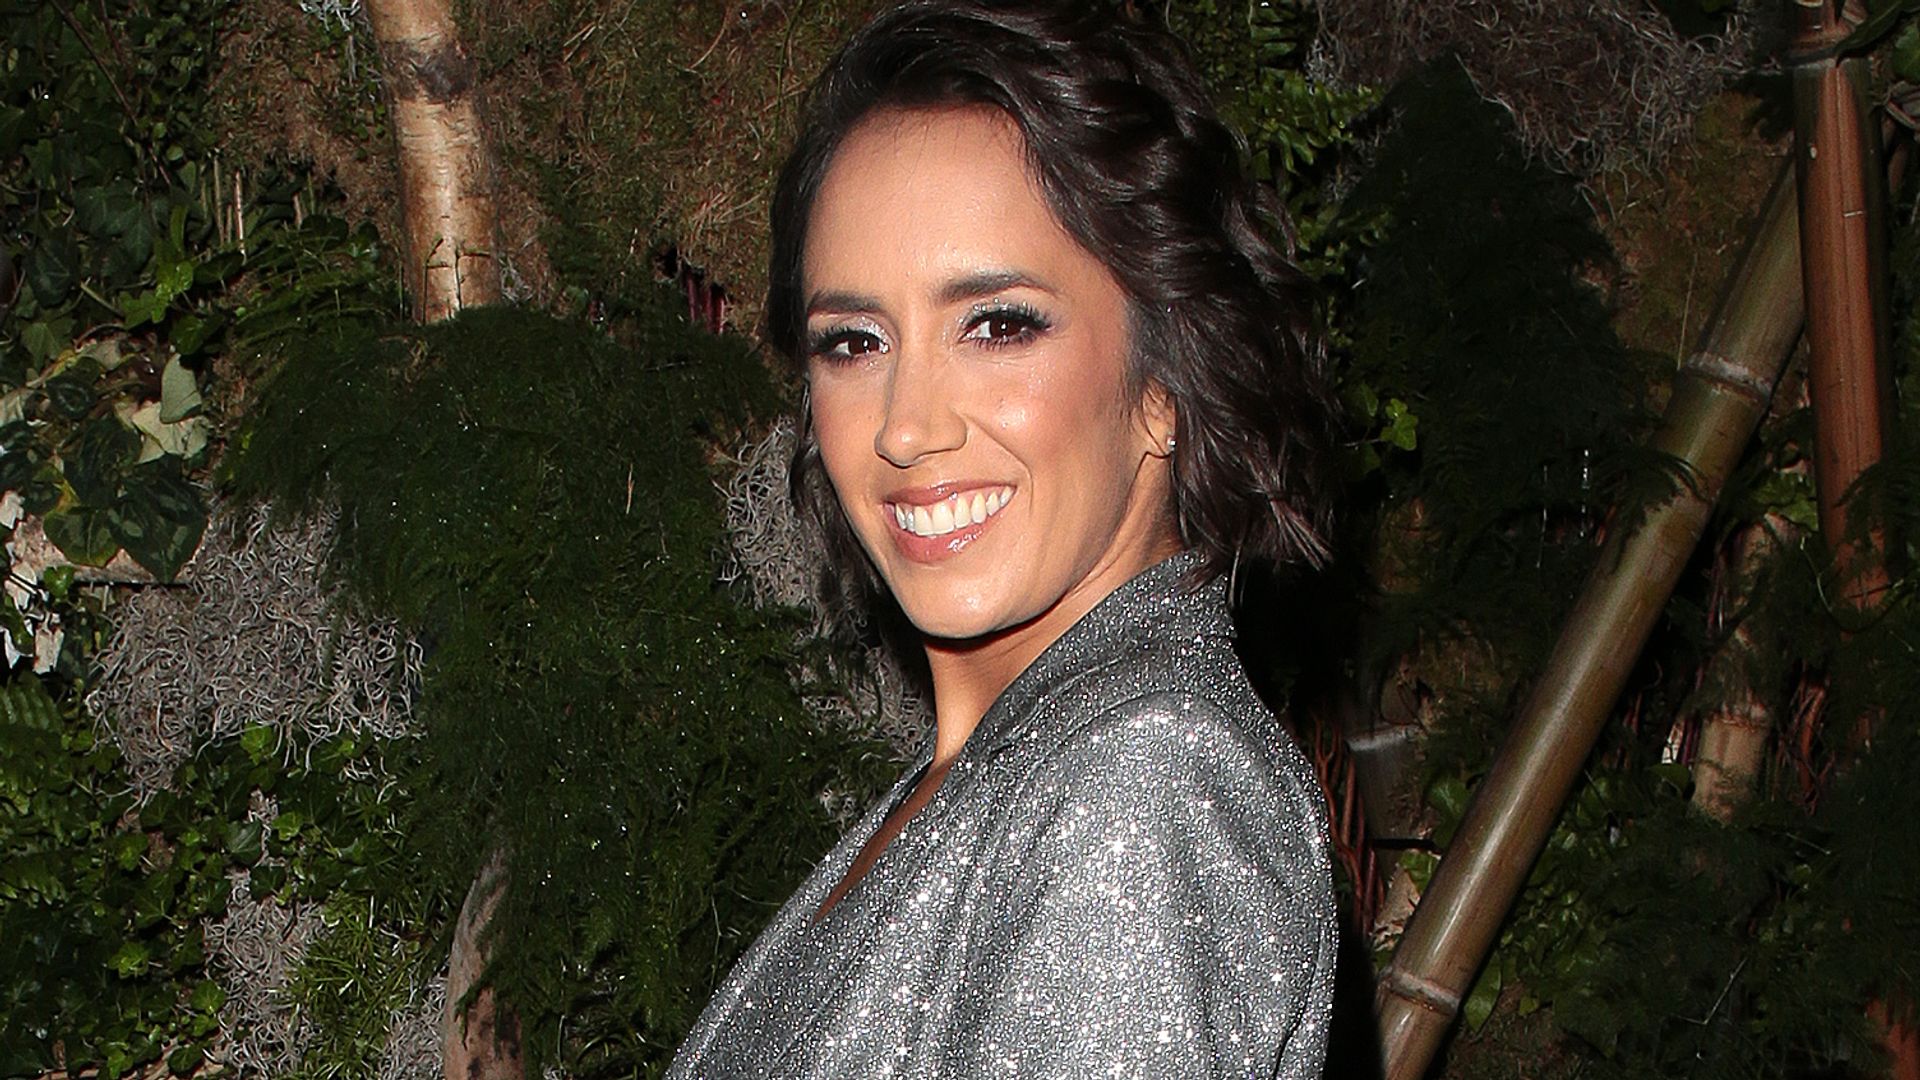 Janette Manrara shares cryptic post as Strictly pro line-up confirmed